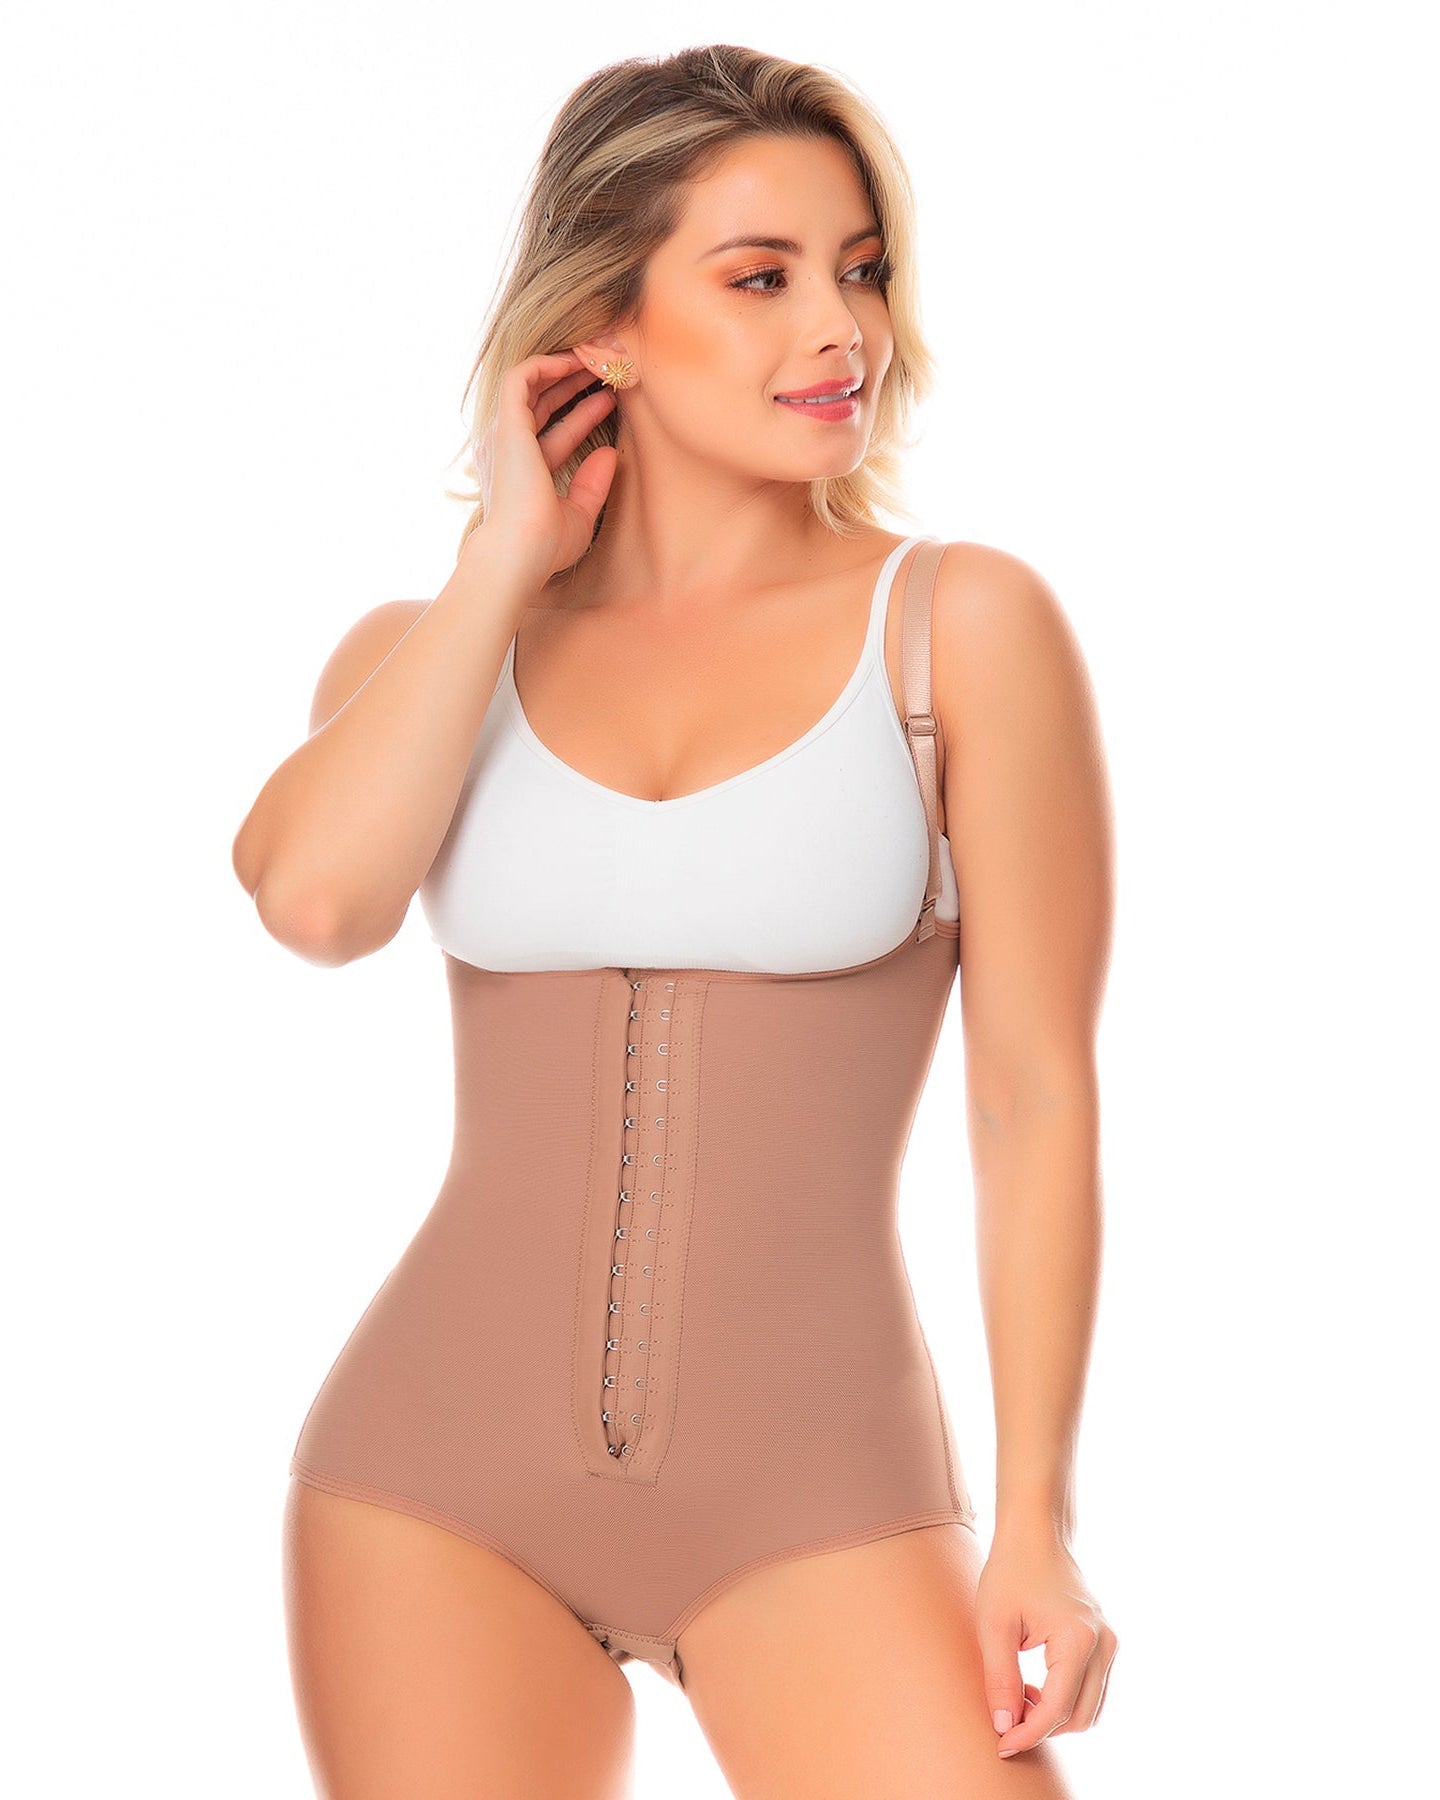 Fajas Colombianas Body Shaper Girdle With 2 Line Hooks, Covered Back, Free Breasts, Perineal Opening Crotch